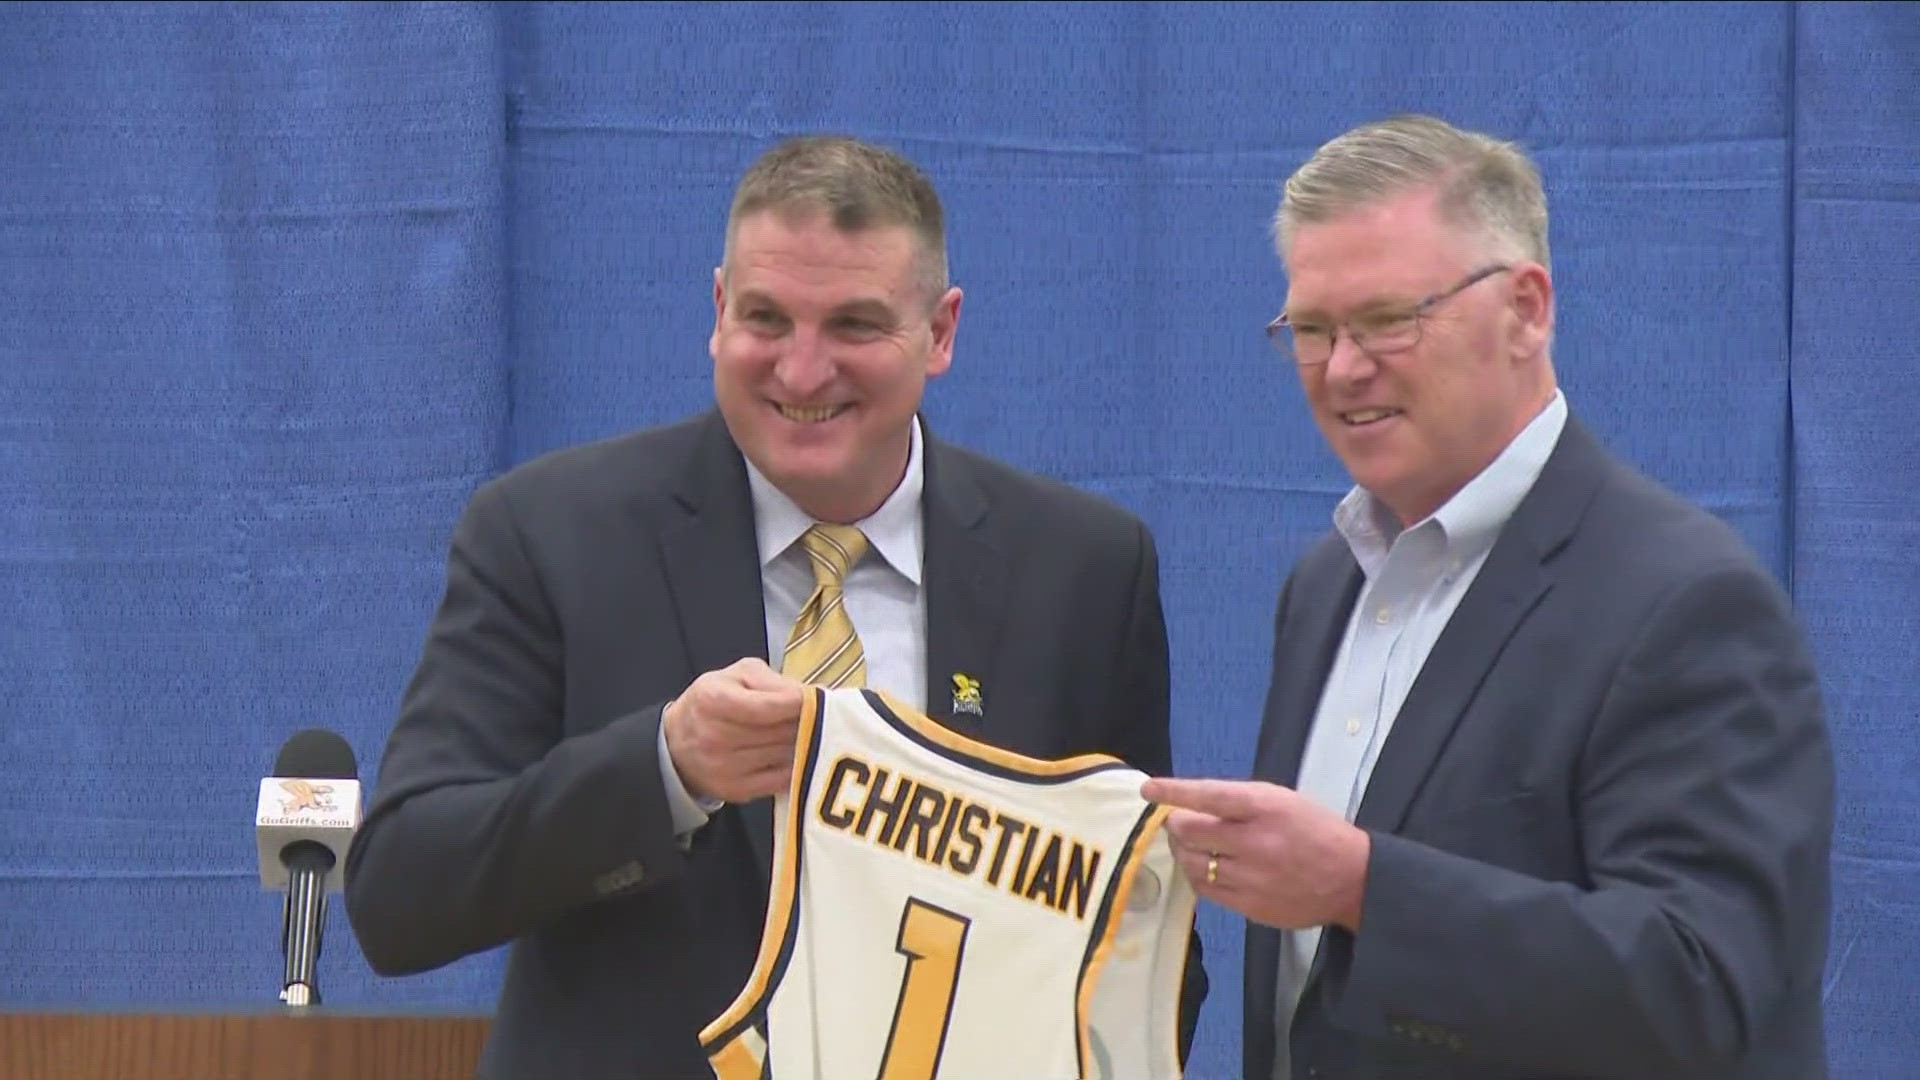 Christian joins the Golden Griffins with 19 years of head coaching experience at the Division I level.